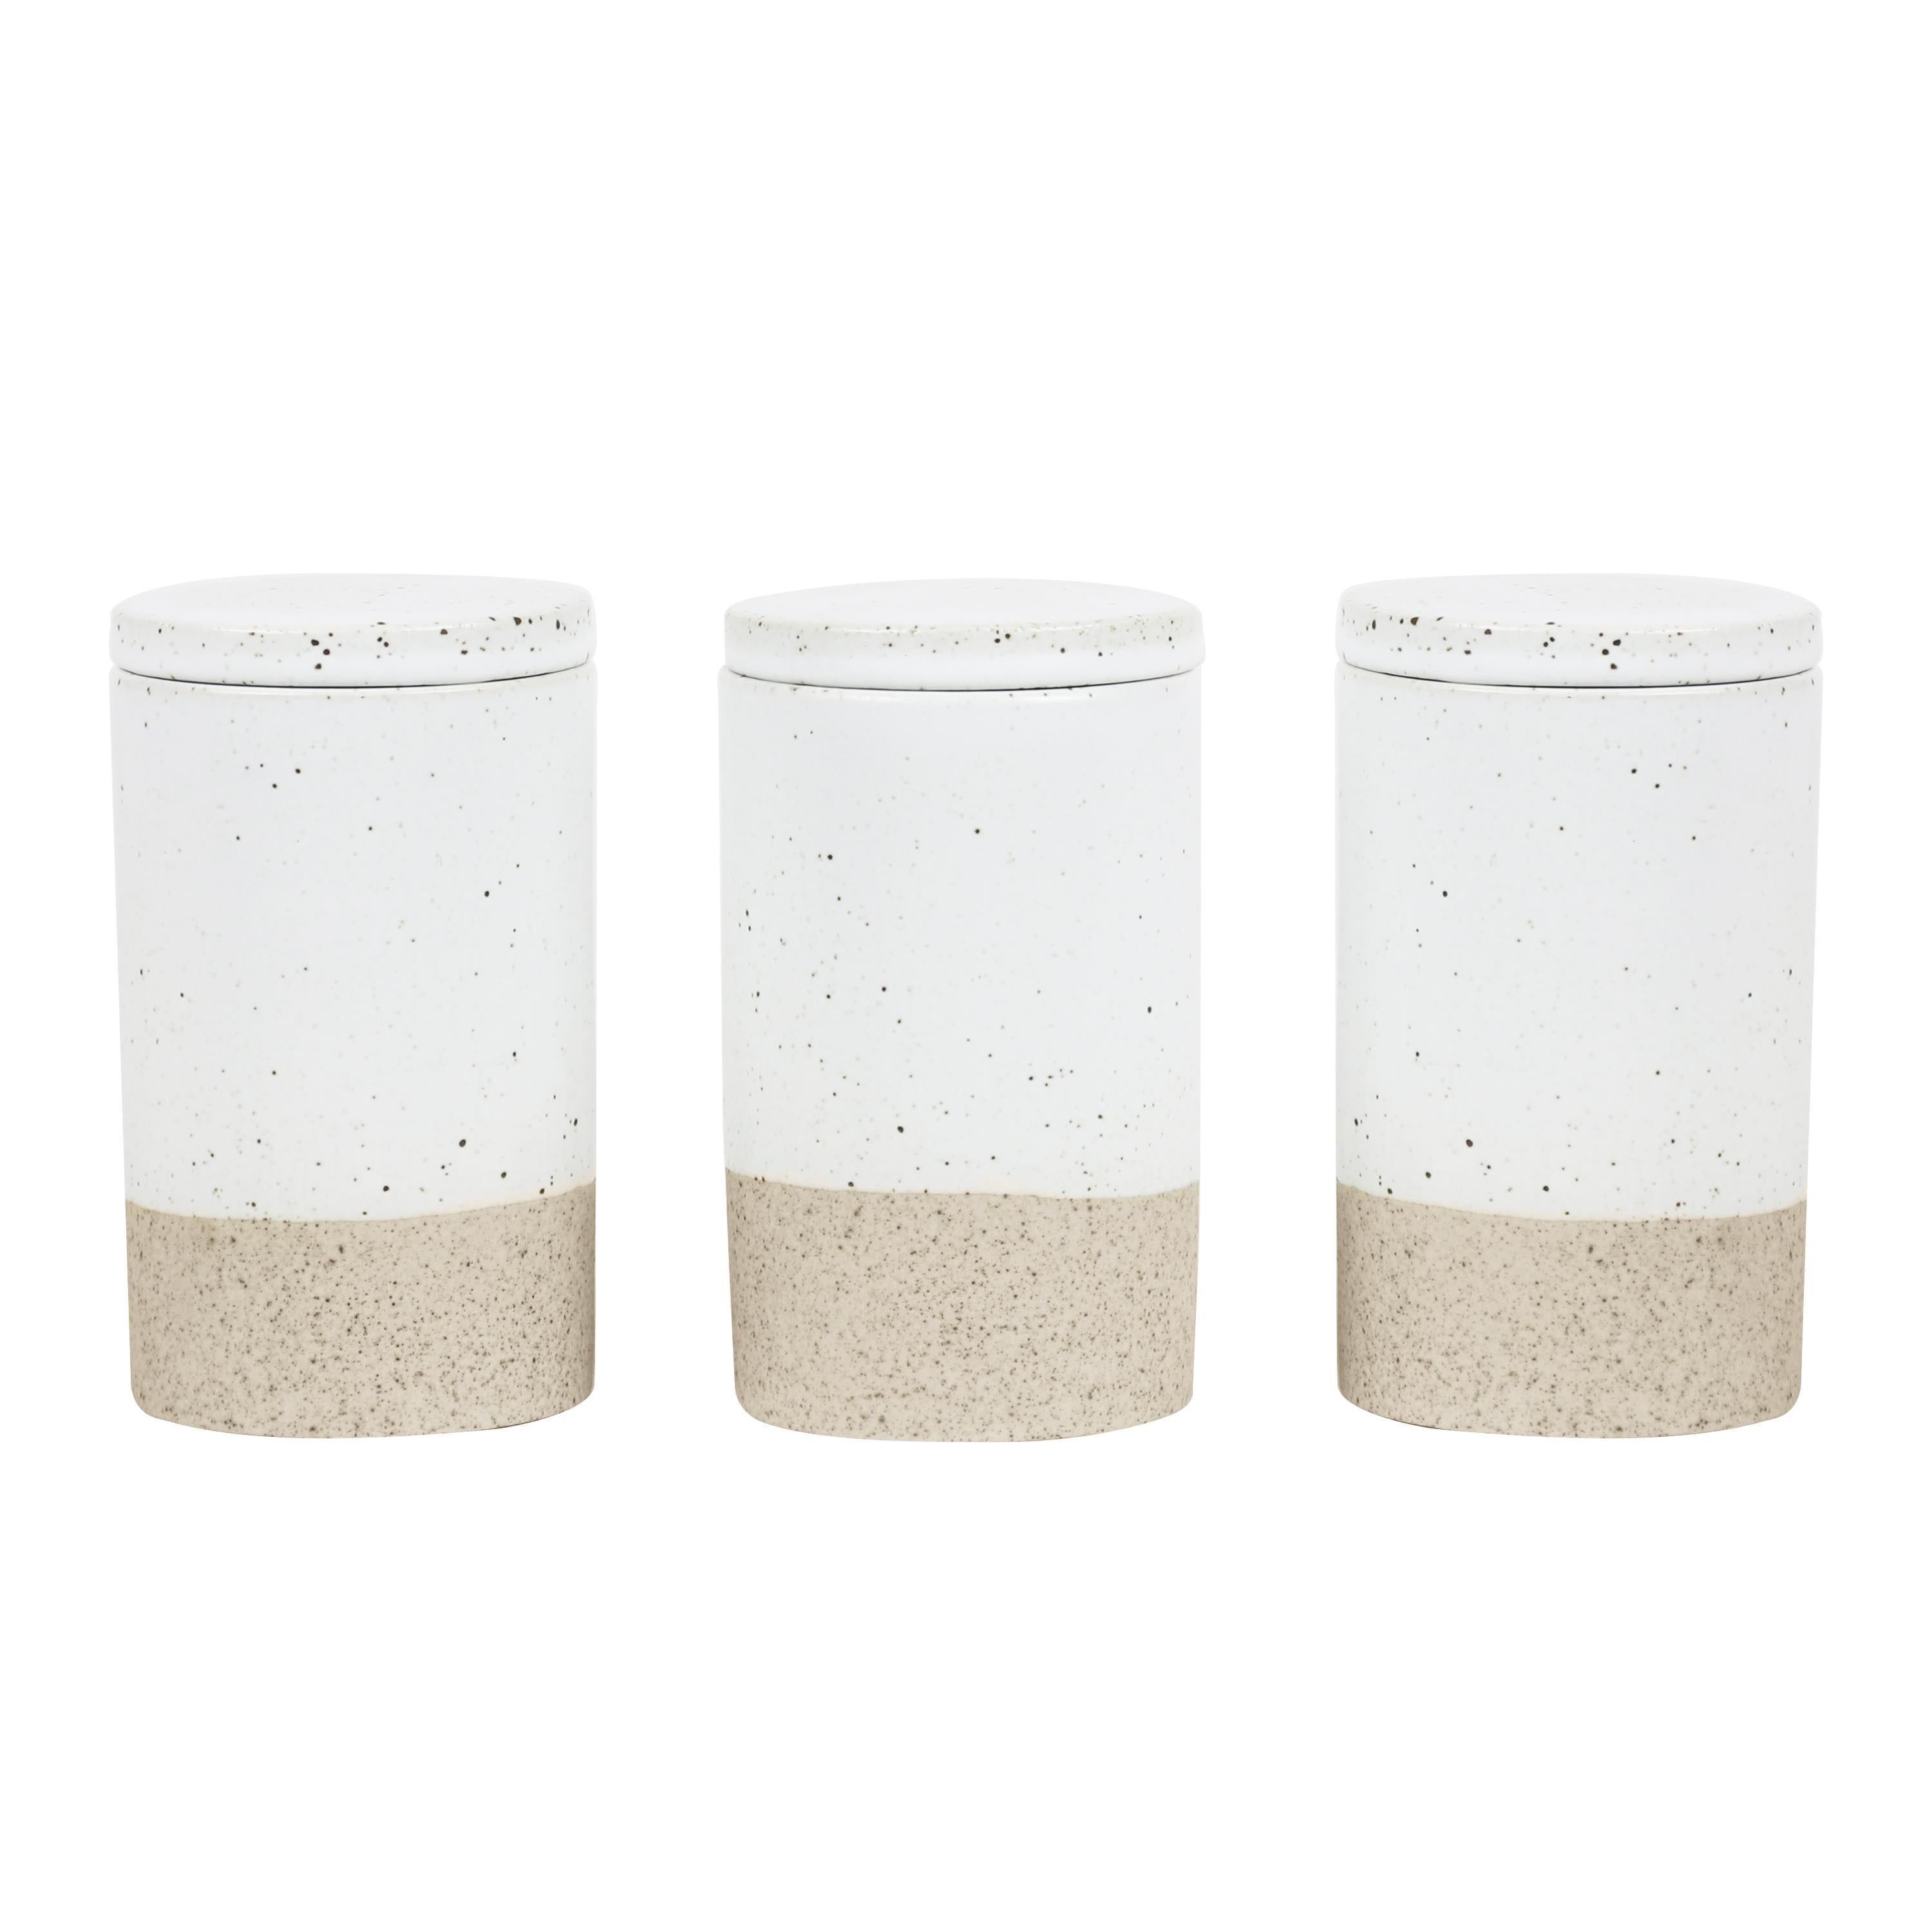 Spice jars set of 3 - white garden to table